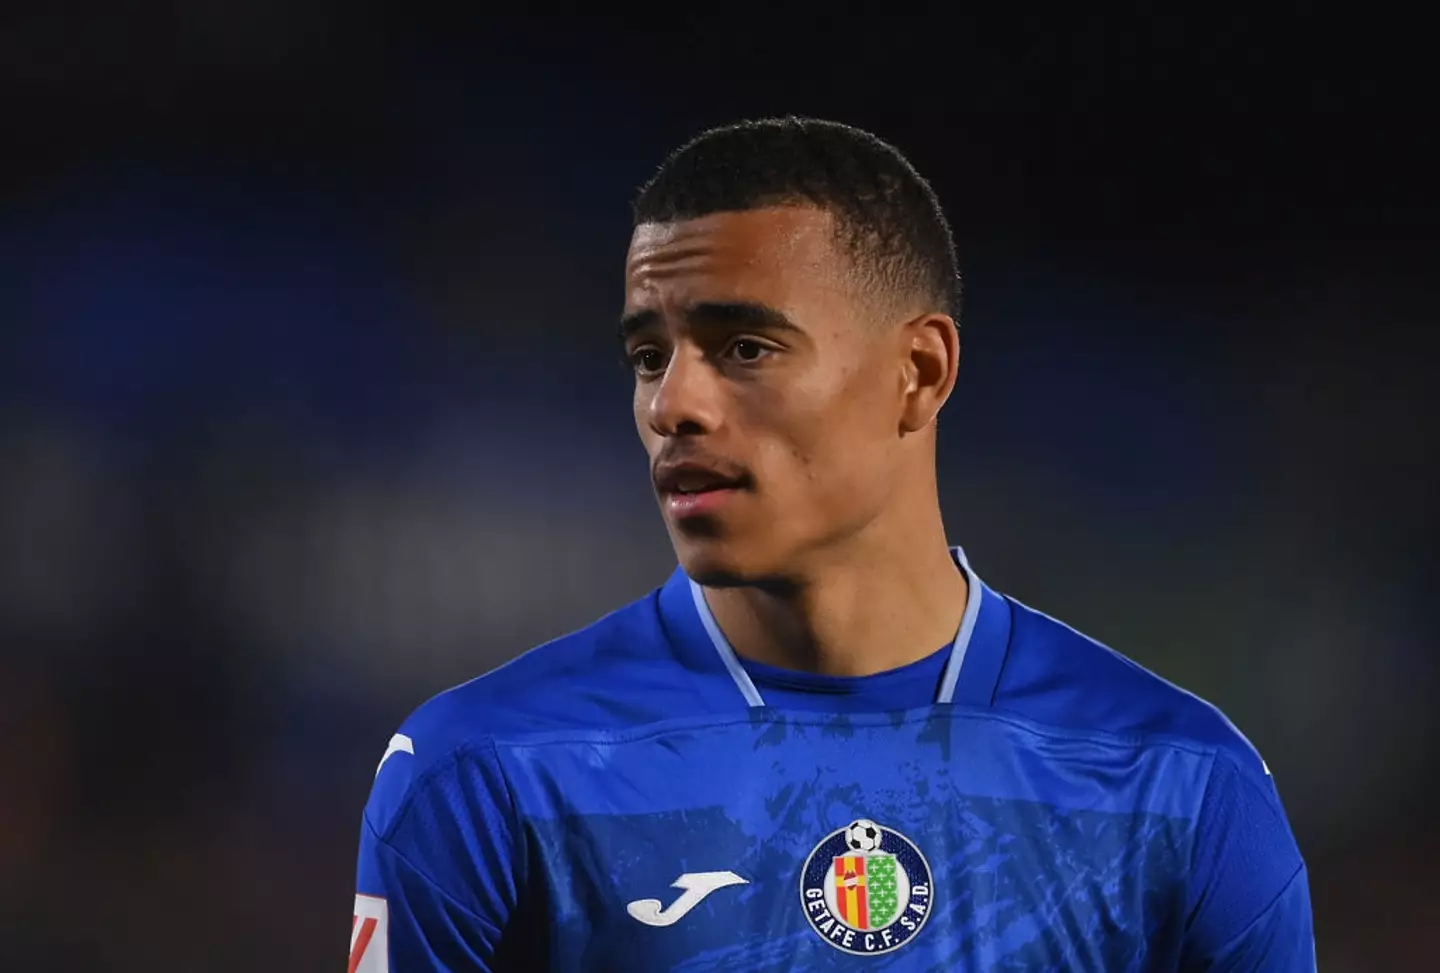 Greenwood is on loan at Getafe from Manchester United (Image: Getty)